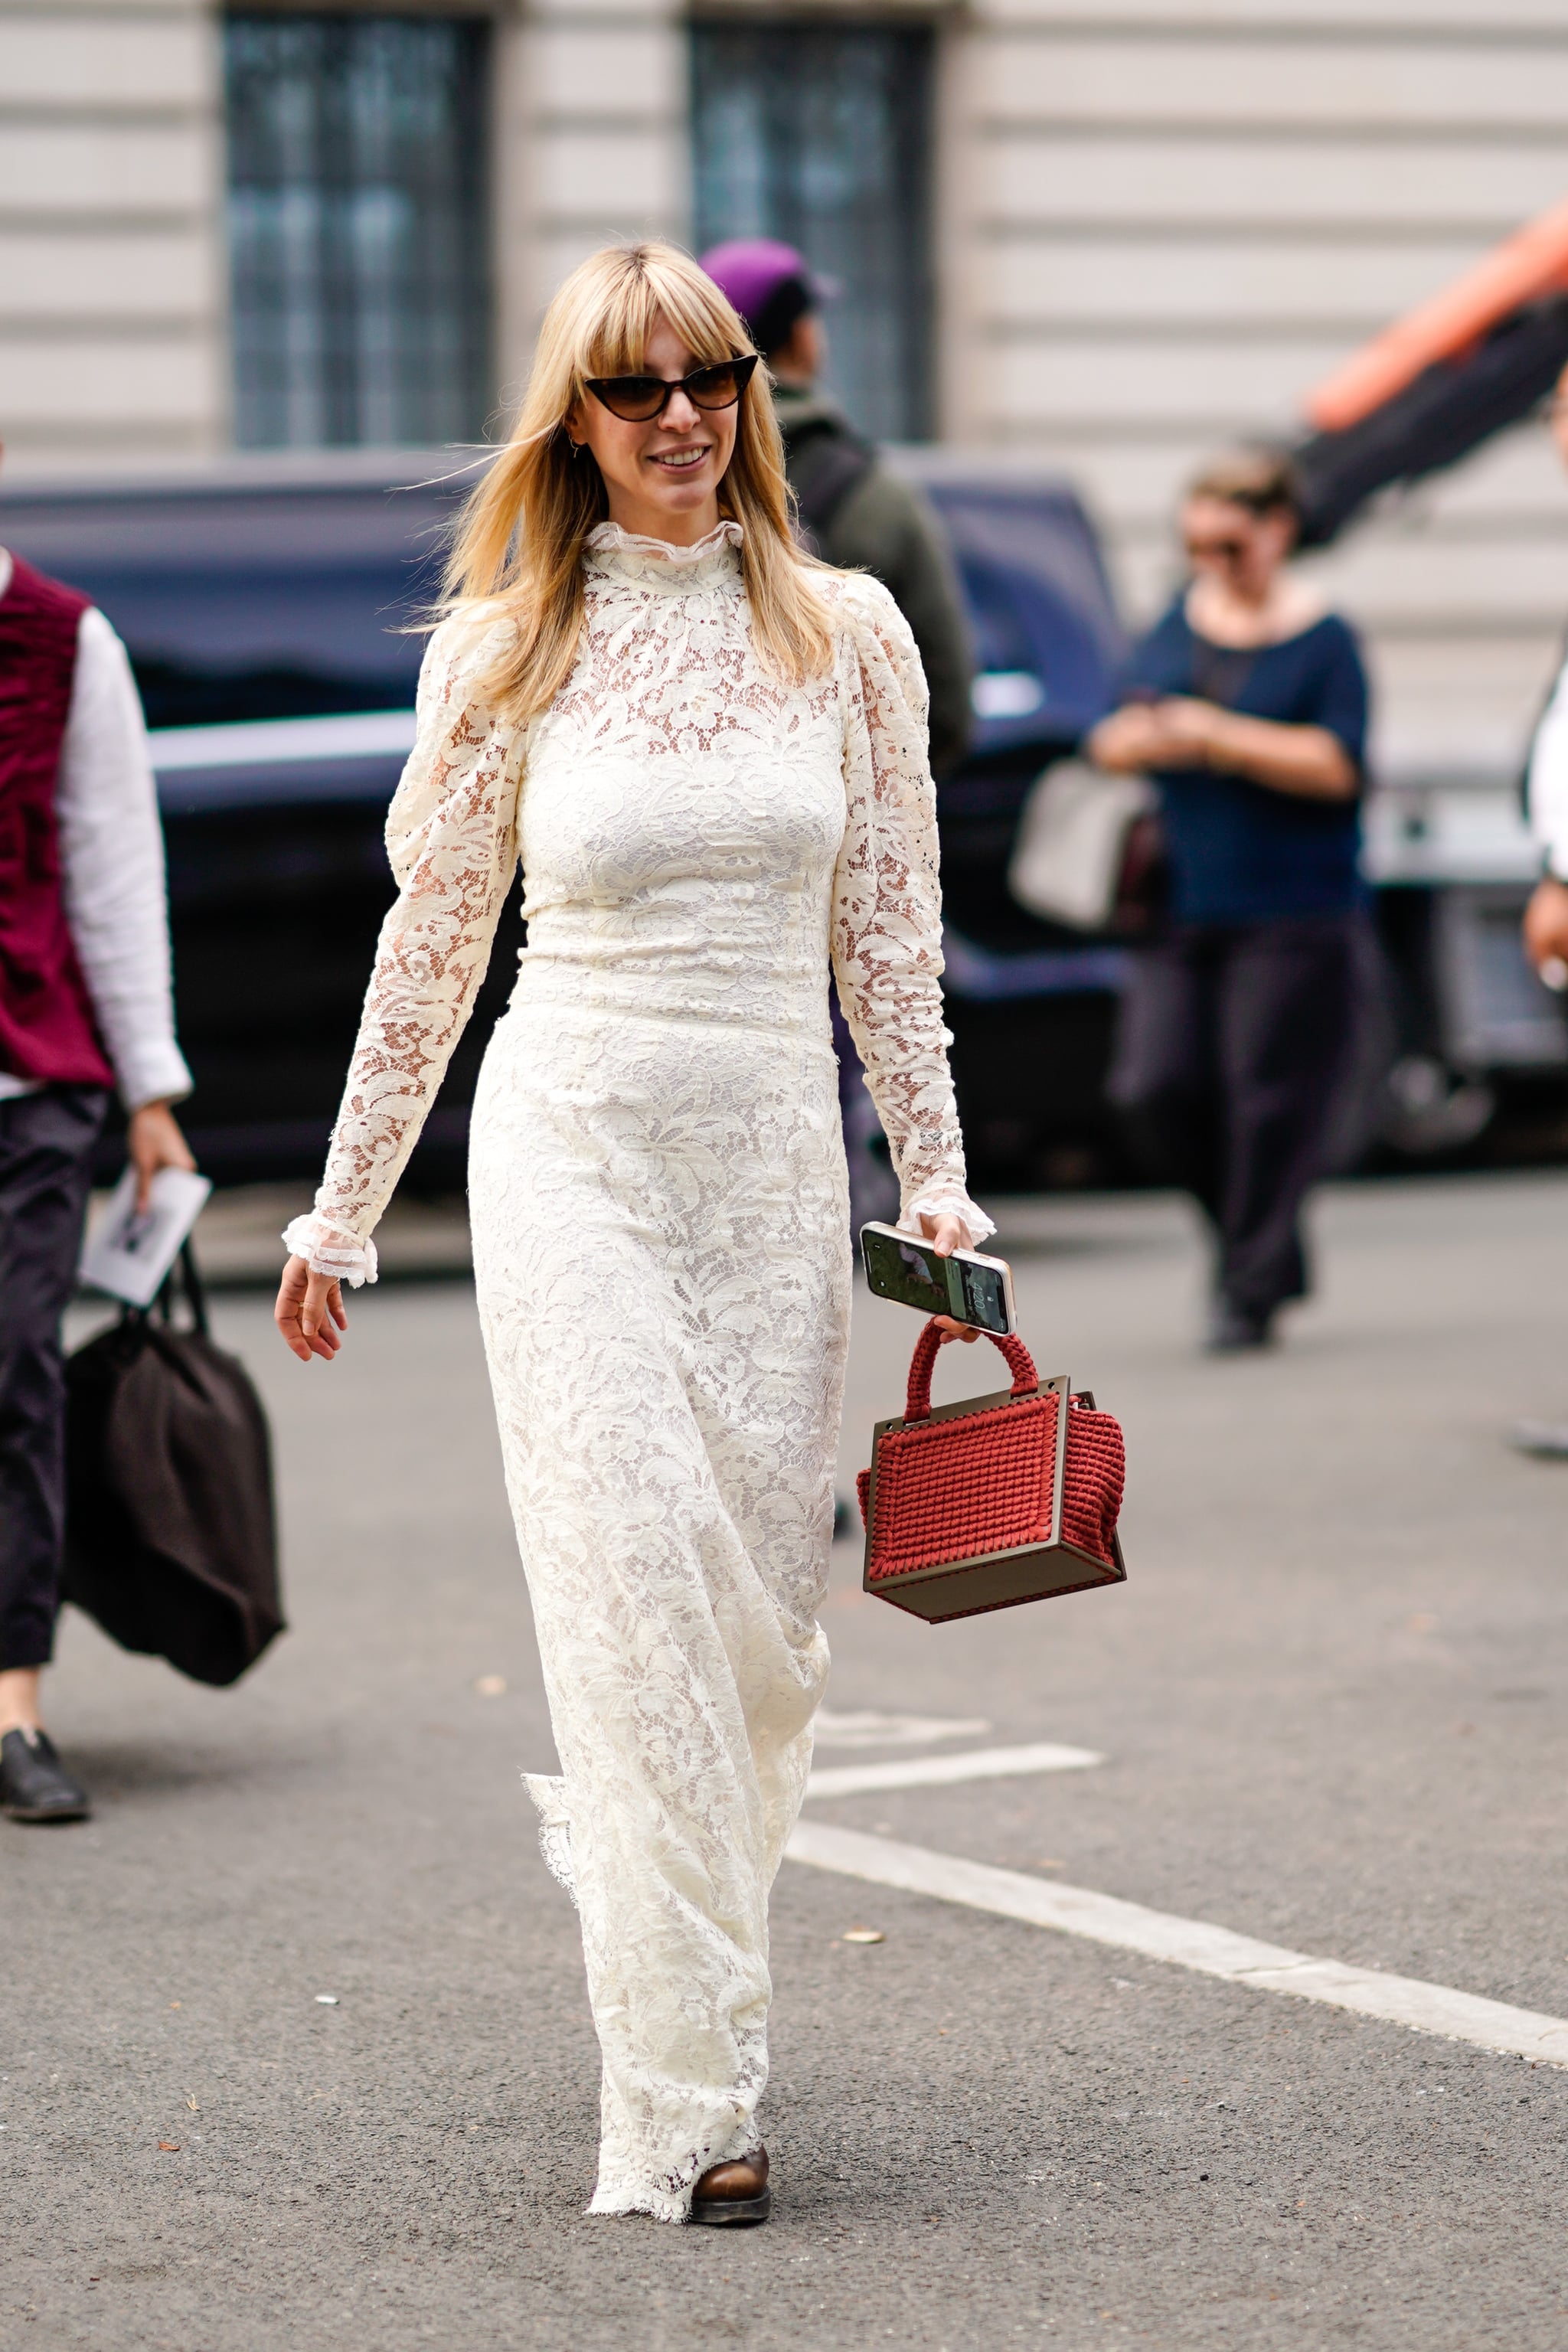 Wear a lace dress with a top-handle bag., This Is How You Should Be Styling  Your Maxi Dress This Season, According to Street Style Stars